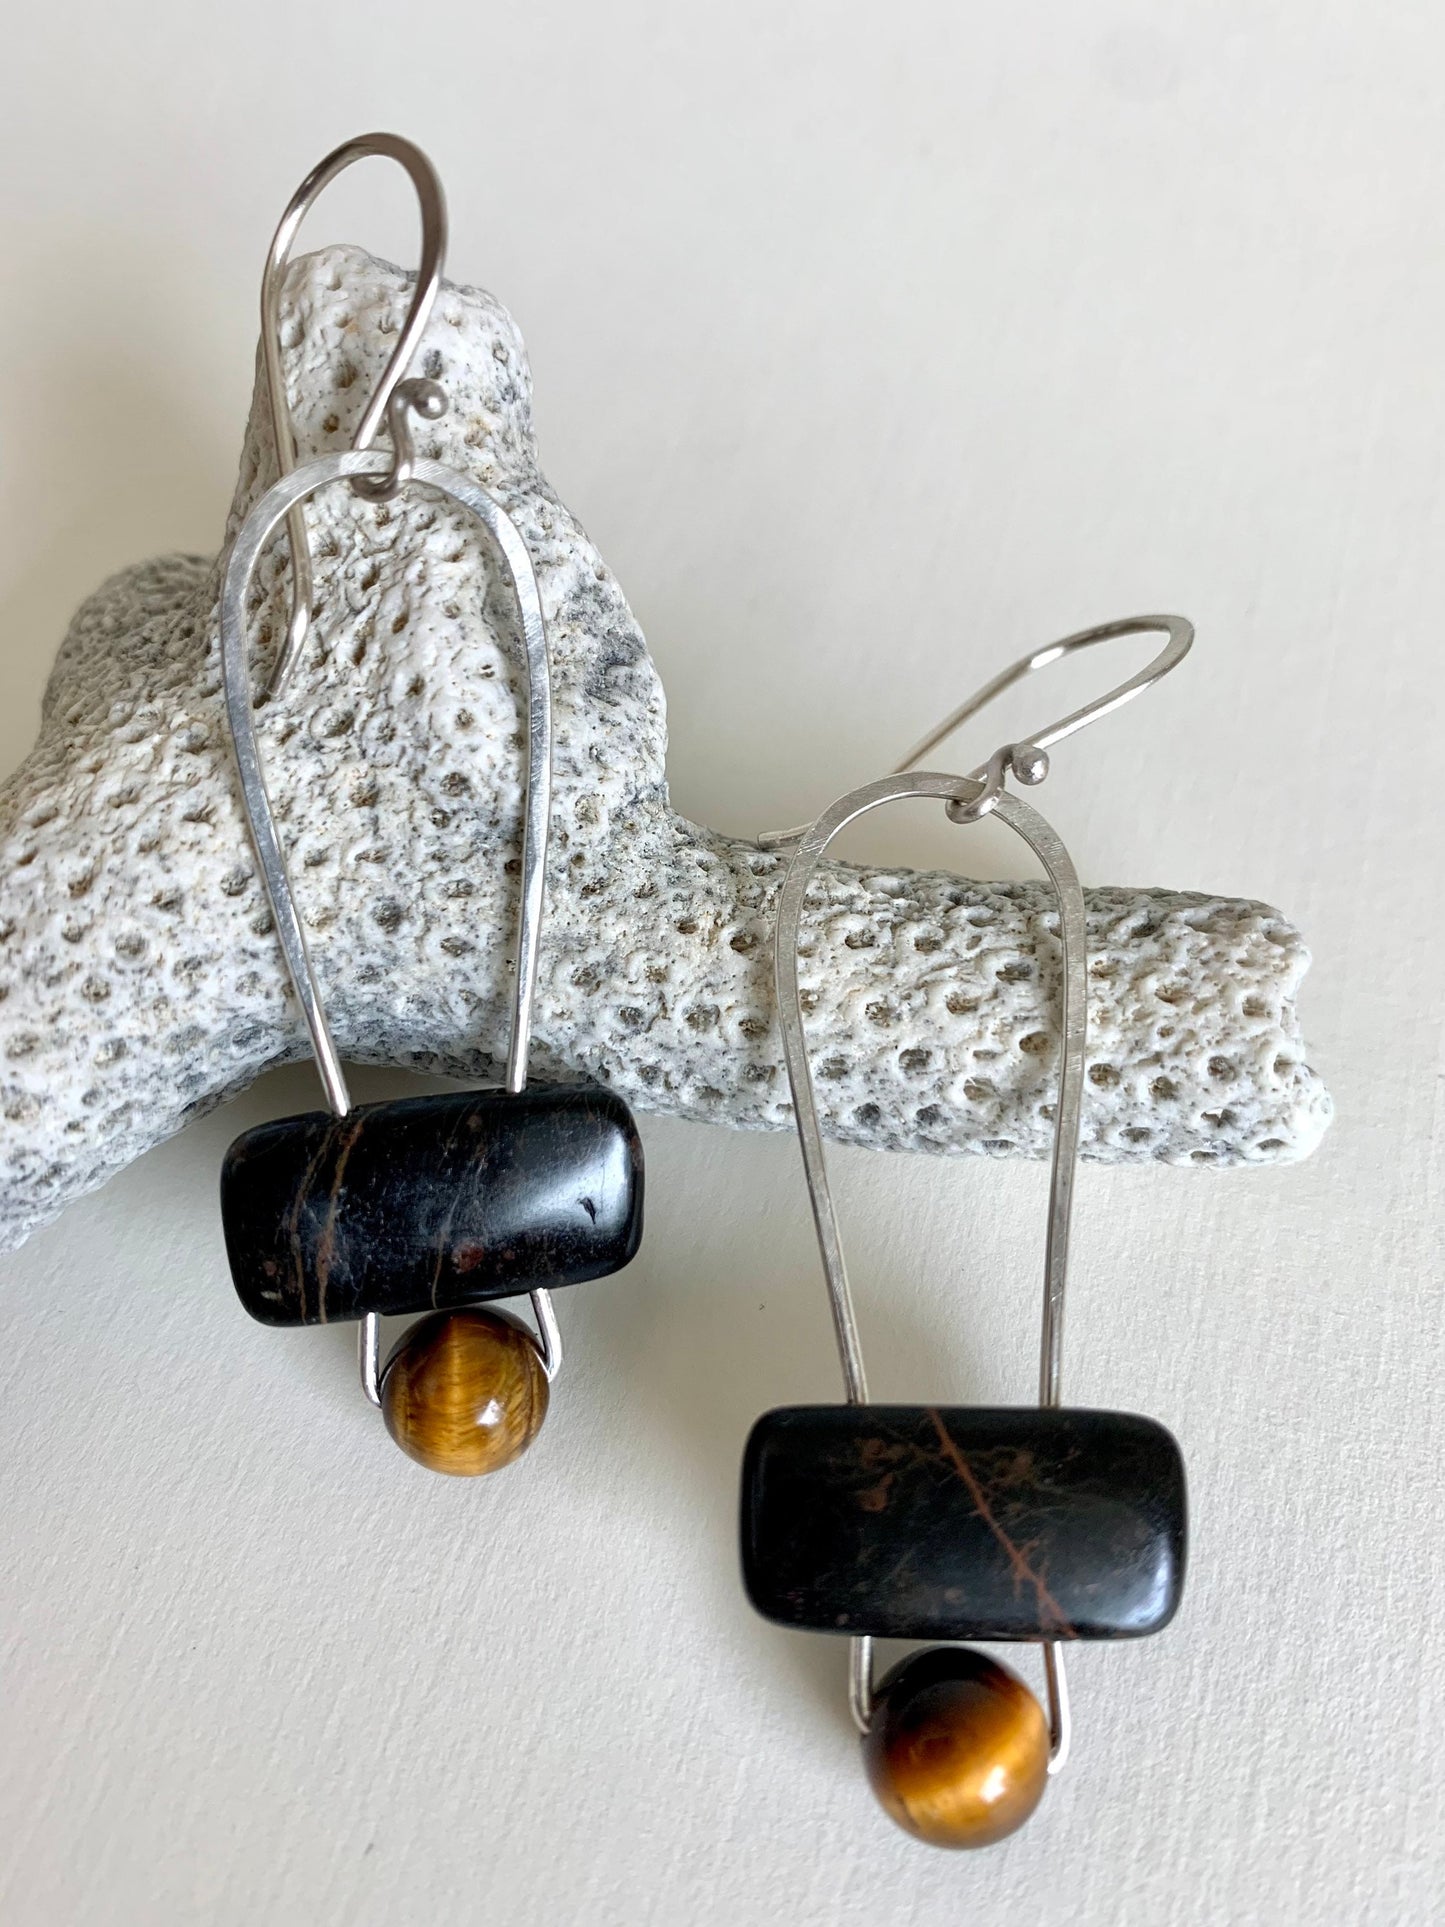 Tiger eye earrings for women - gemstone and sterling jewelry - artisan crafted, one-of-a-kind handmade earrings - earthy gemstone earrings.